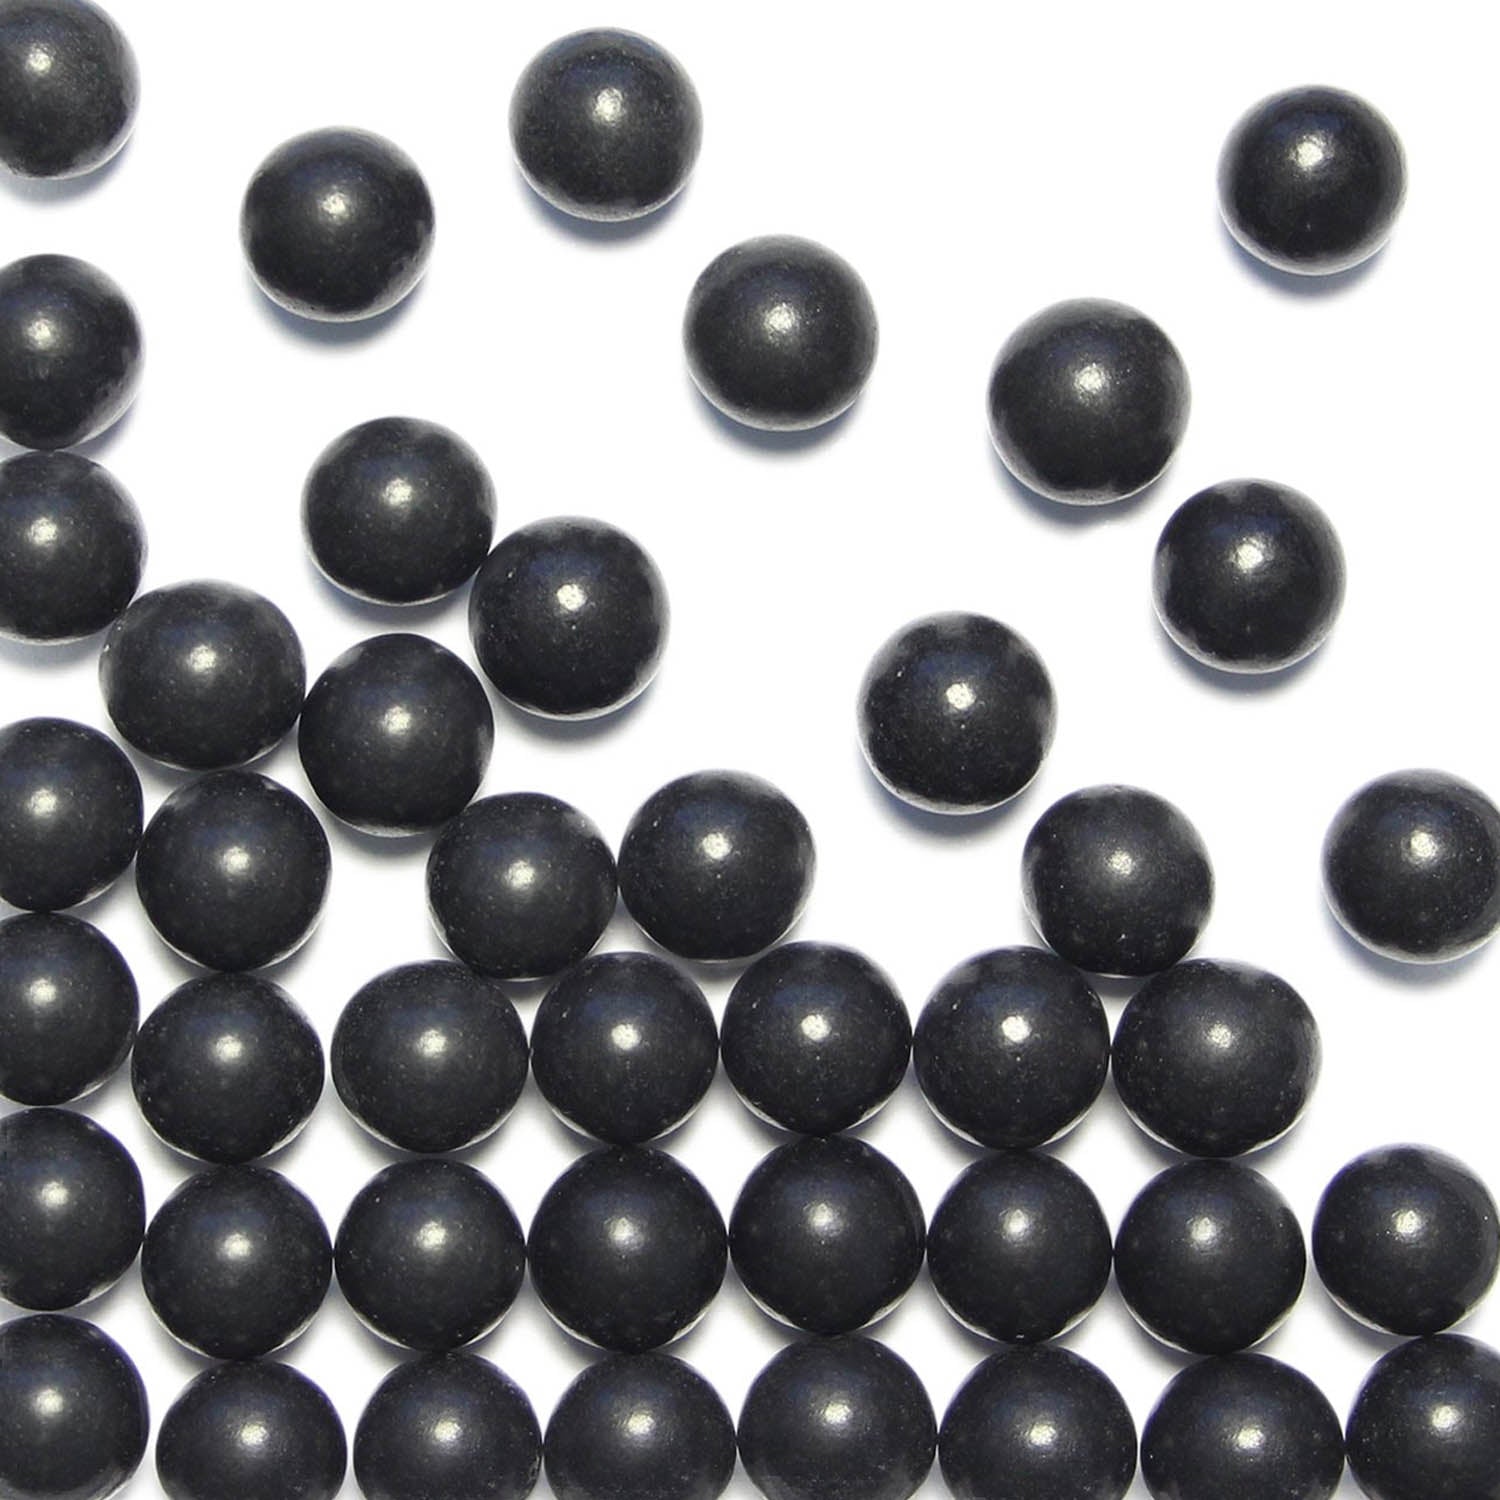 Pearly Black Sugar Pearls 5-6mm - 1 Pound - edible black sugar pearl  sprinkles, edible pearls, metallic black